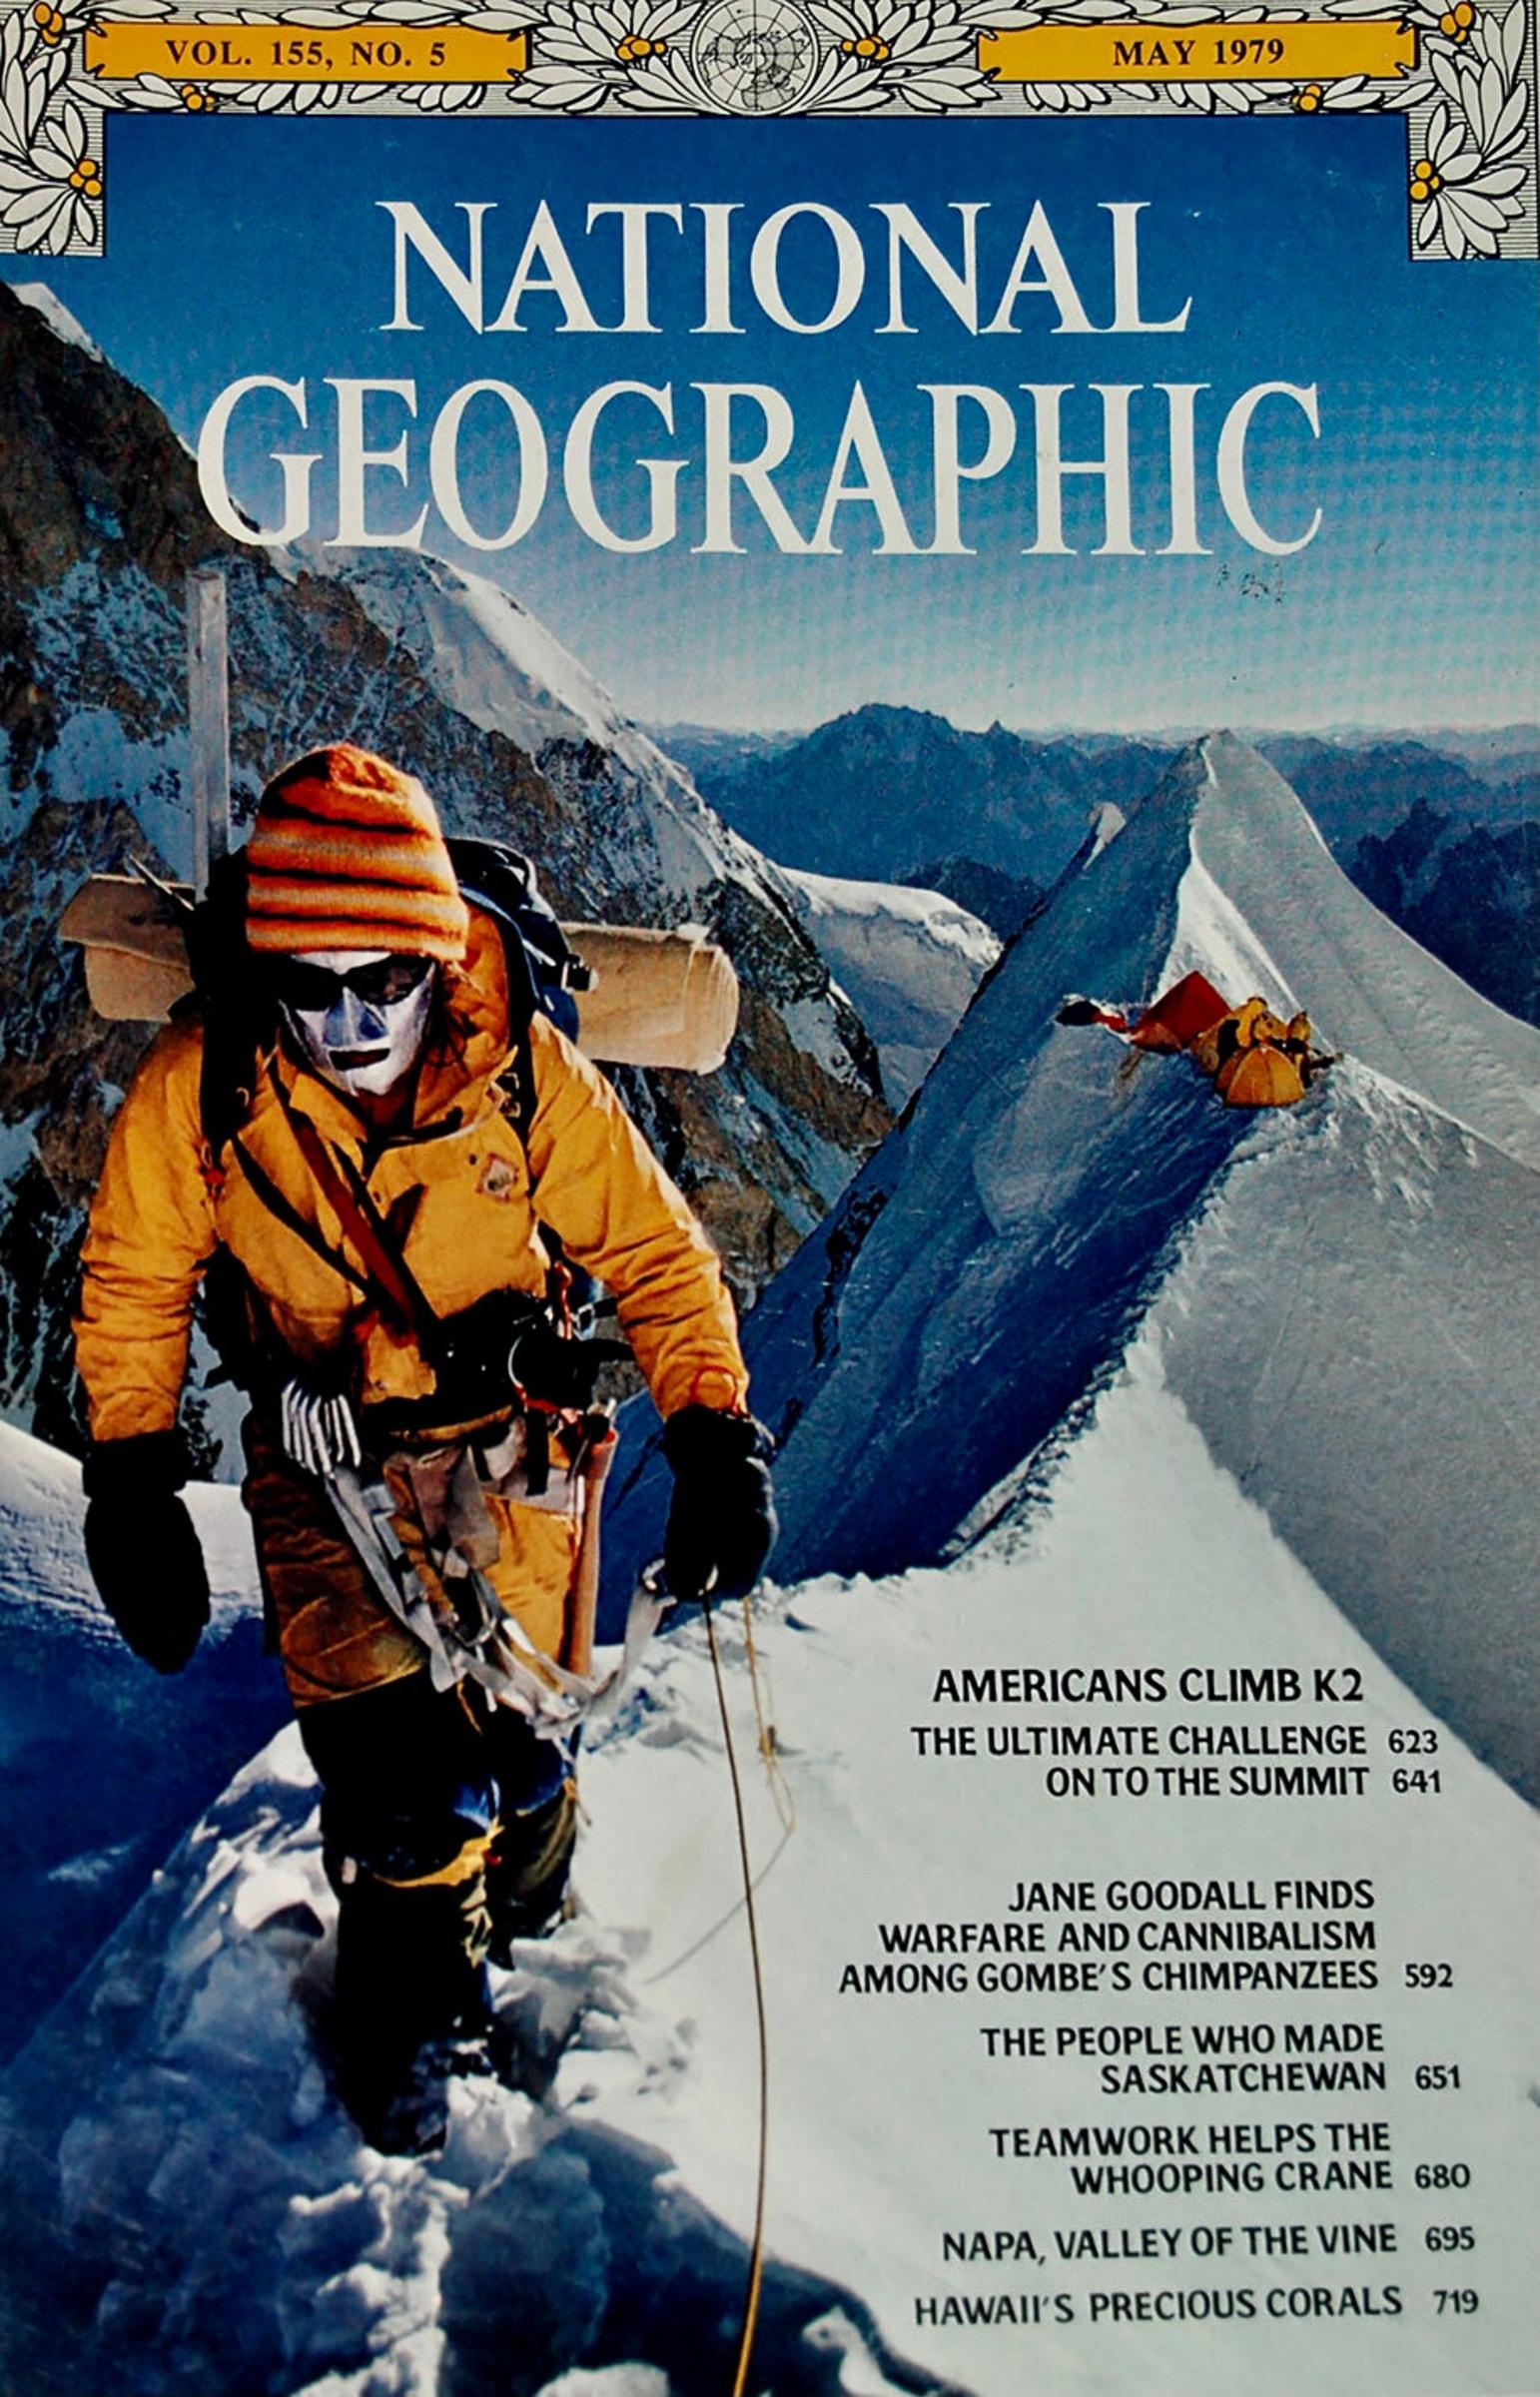 Ridgeway featured on the cover of National Geographic in May 1979, months after he summited K2